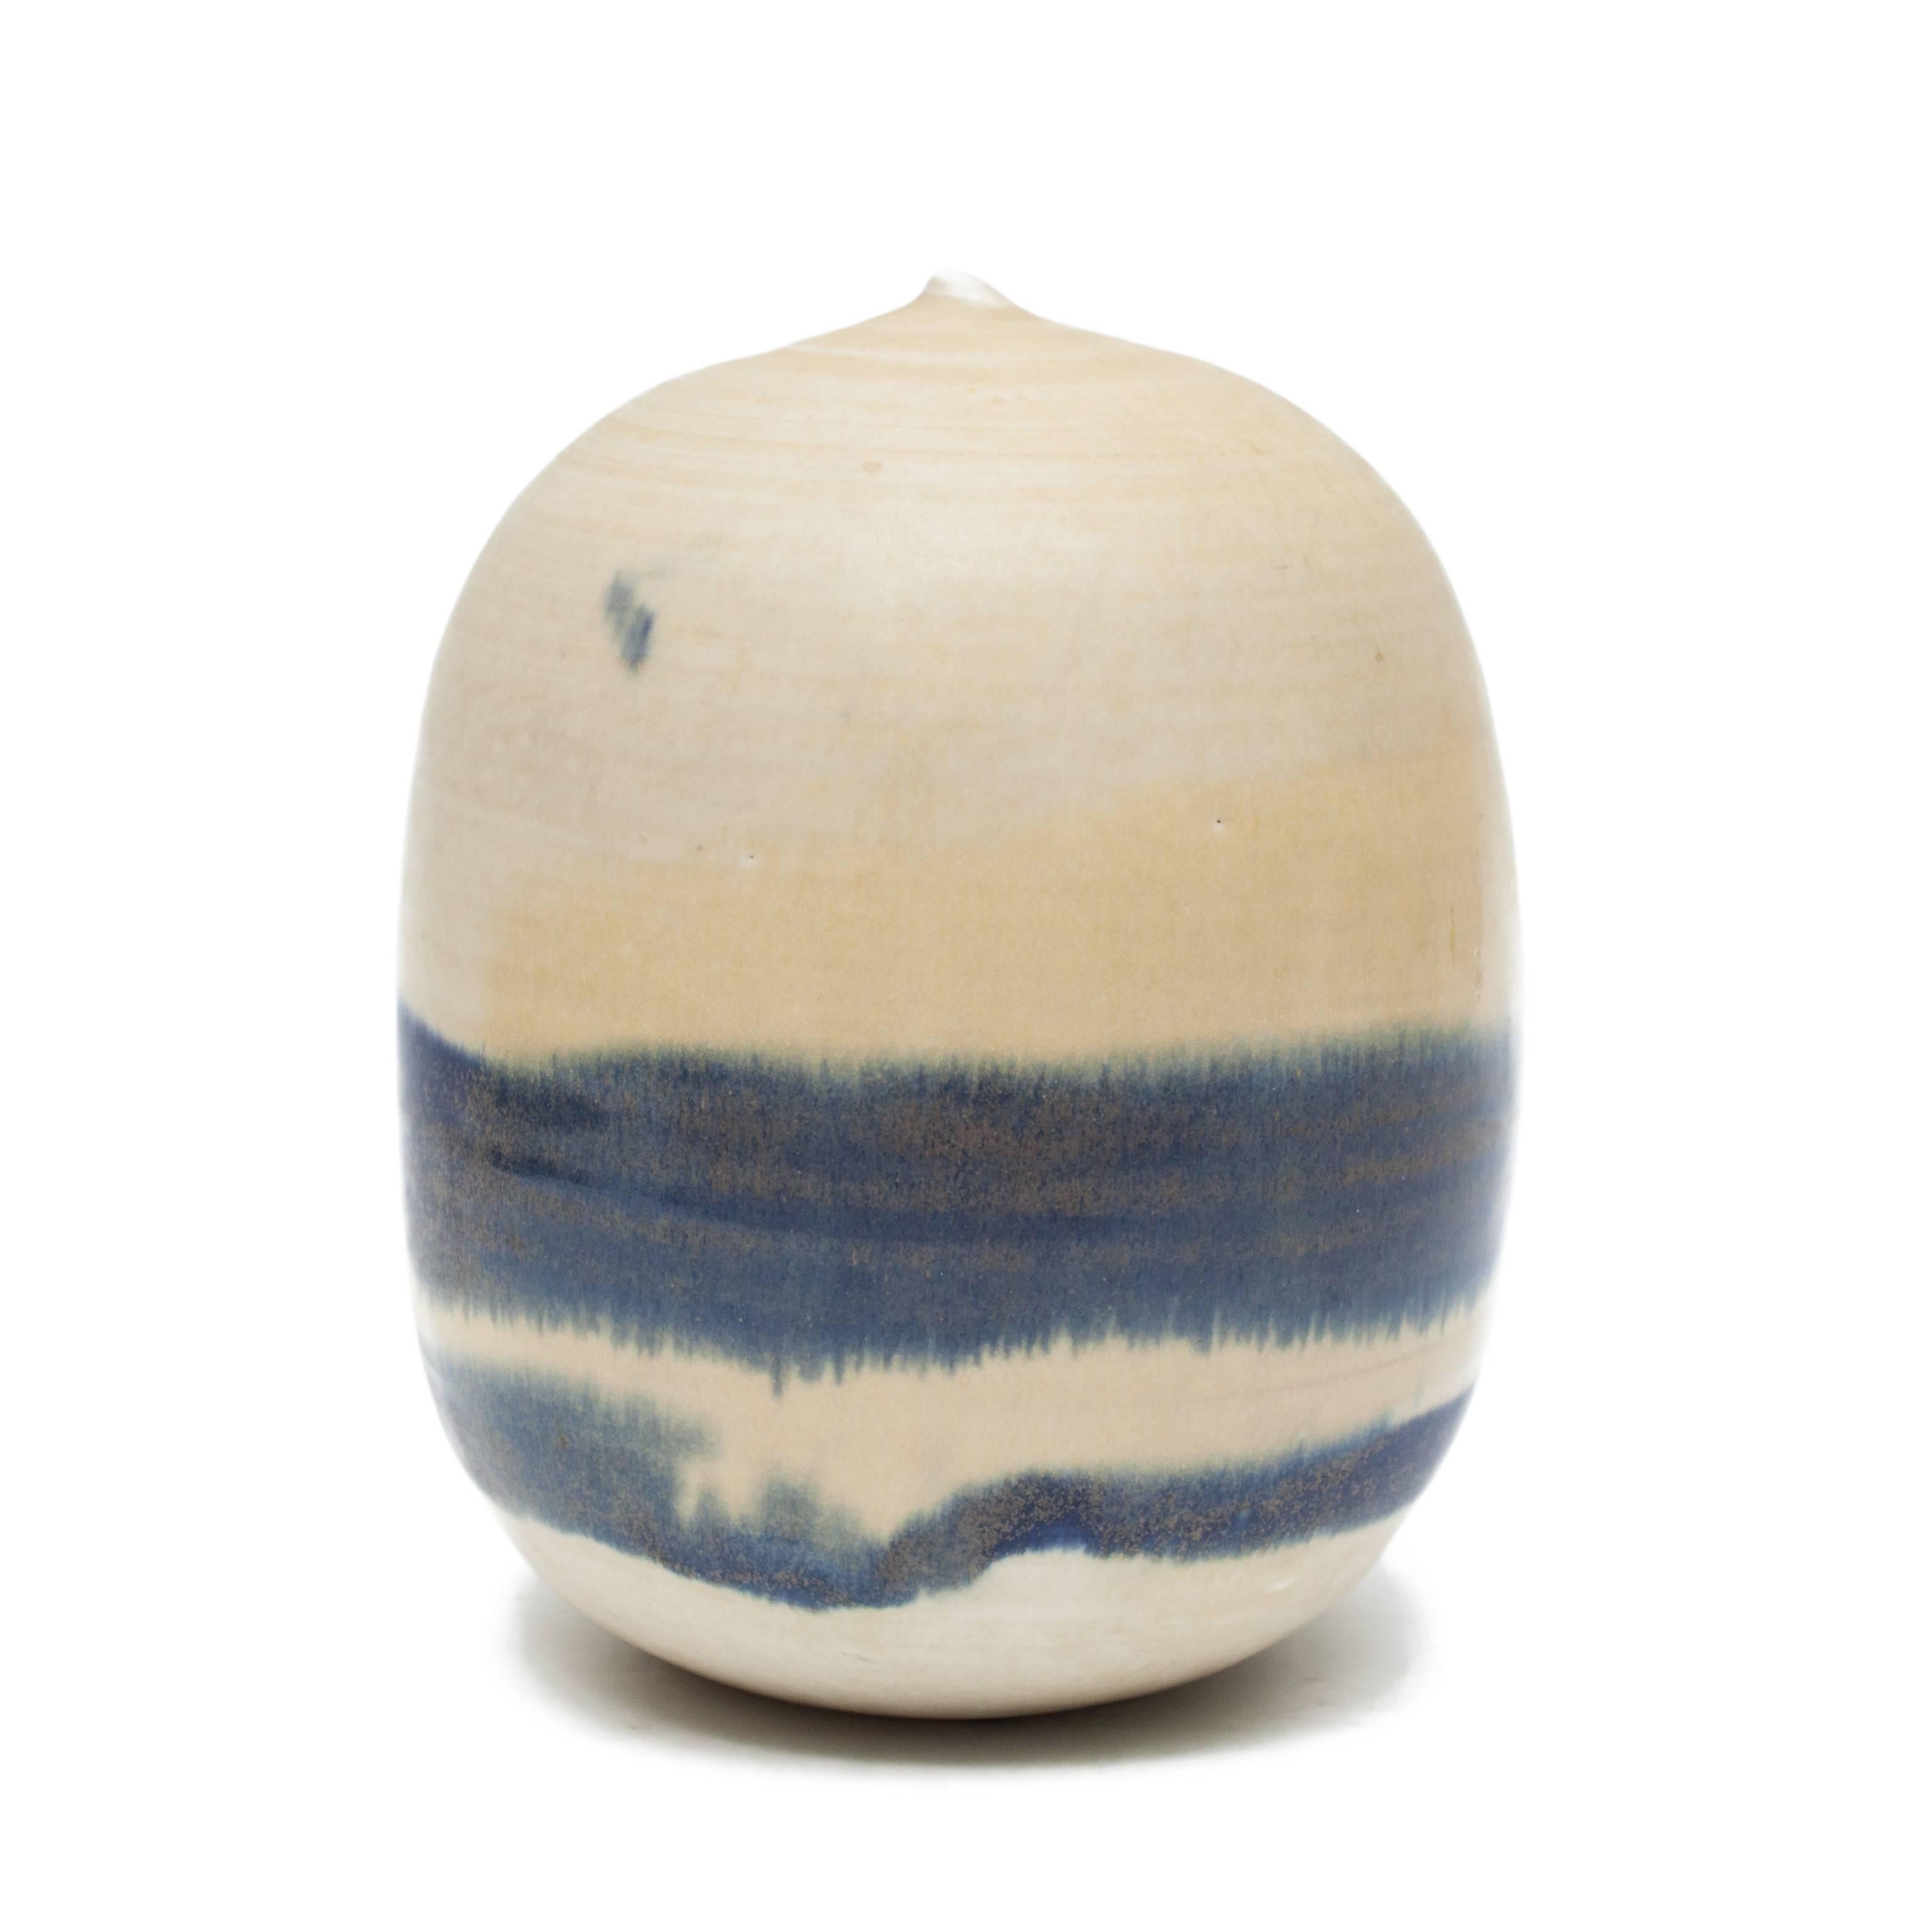 Moon Pot with Rattles - Beige Abstract Sculpture by Toshiko Takaezu